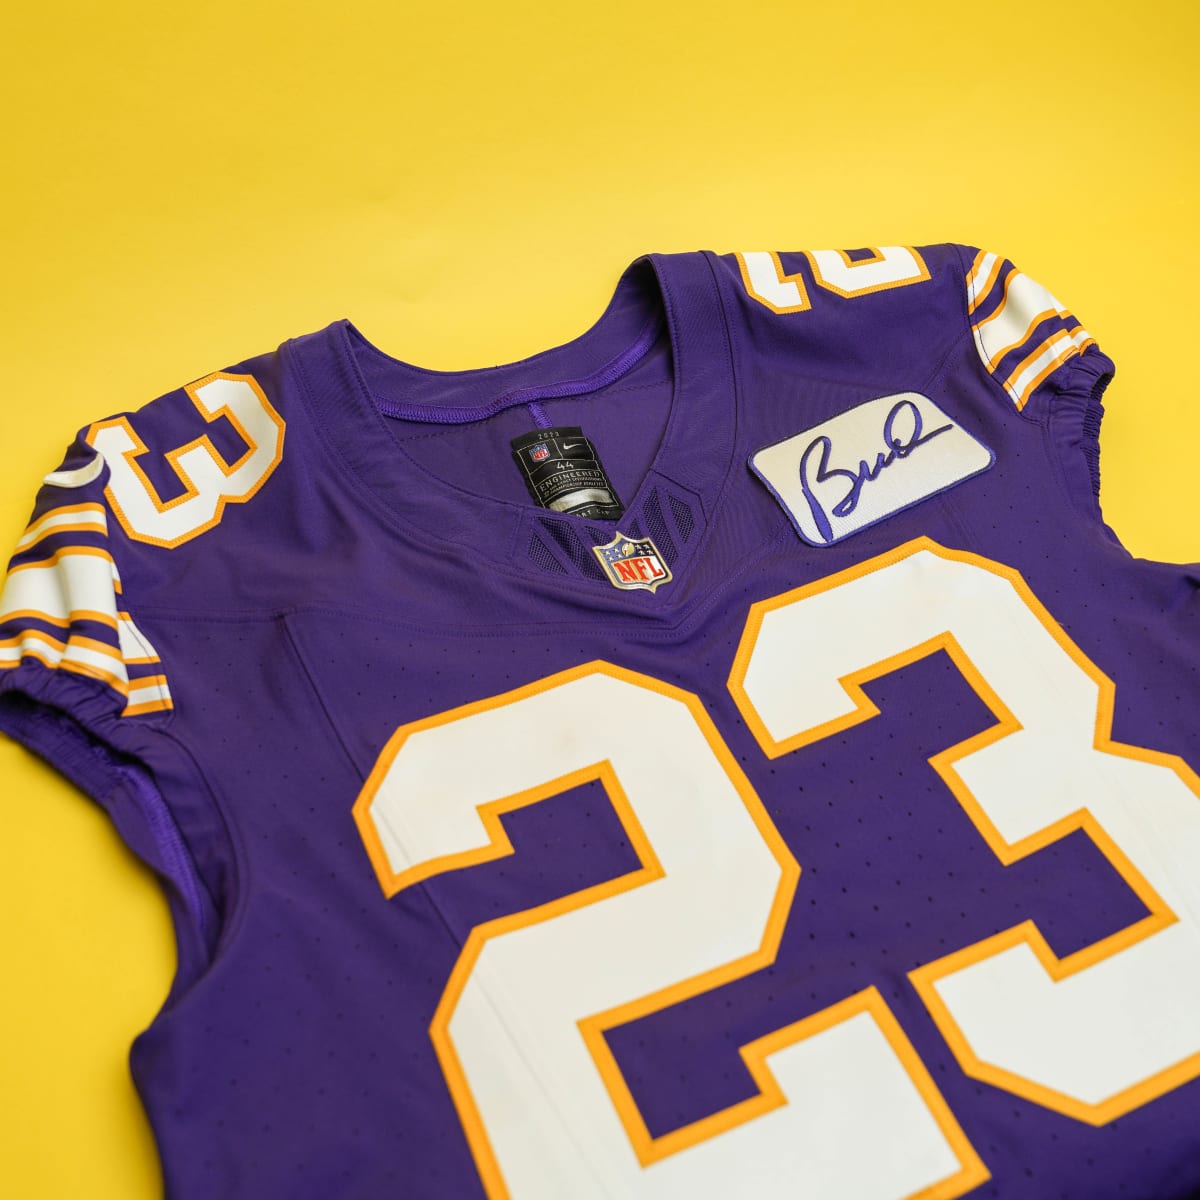 Vikings to honor Bud Grant with jersey patch, helmet sticker in